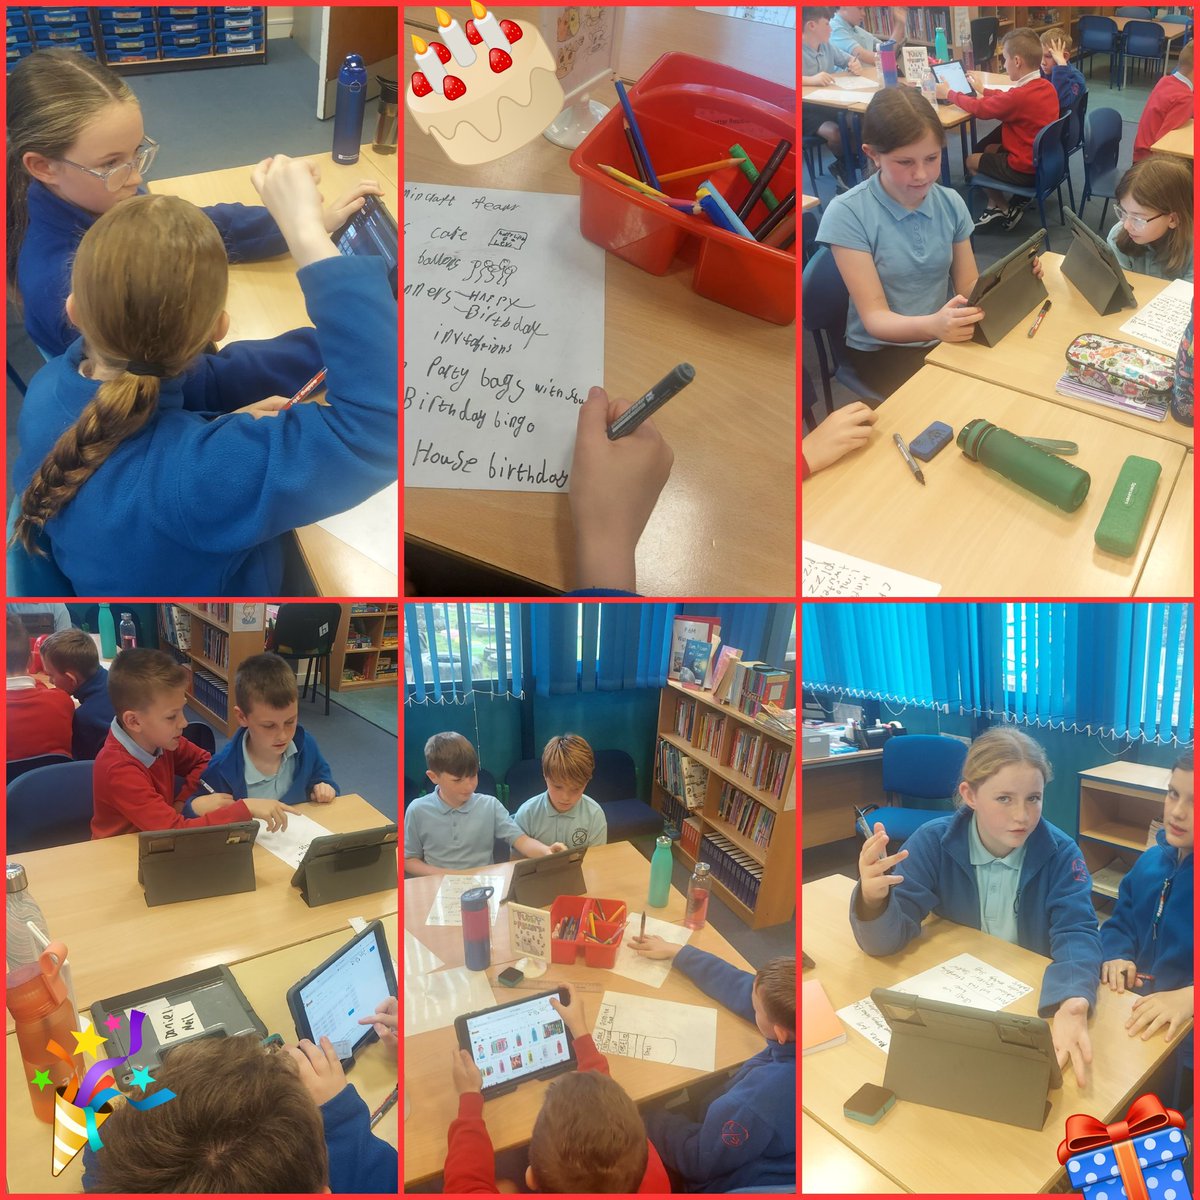 P6 are investigating money today. Our task was to work within a budget to plan a child's birthday party.  We had some really creative ideas to save money and were also quite shocked at the prices of everything! 
#lifeskills